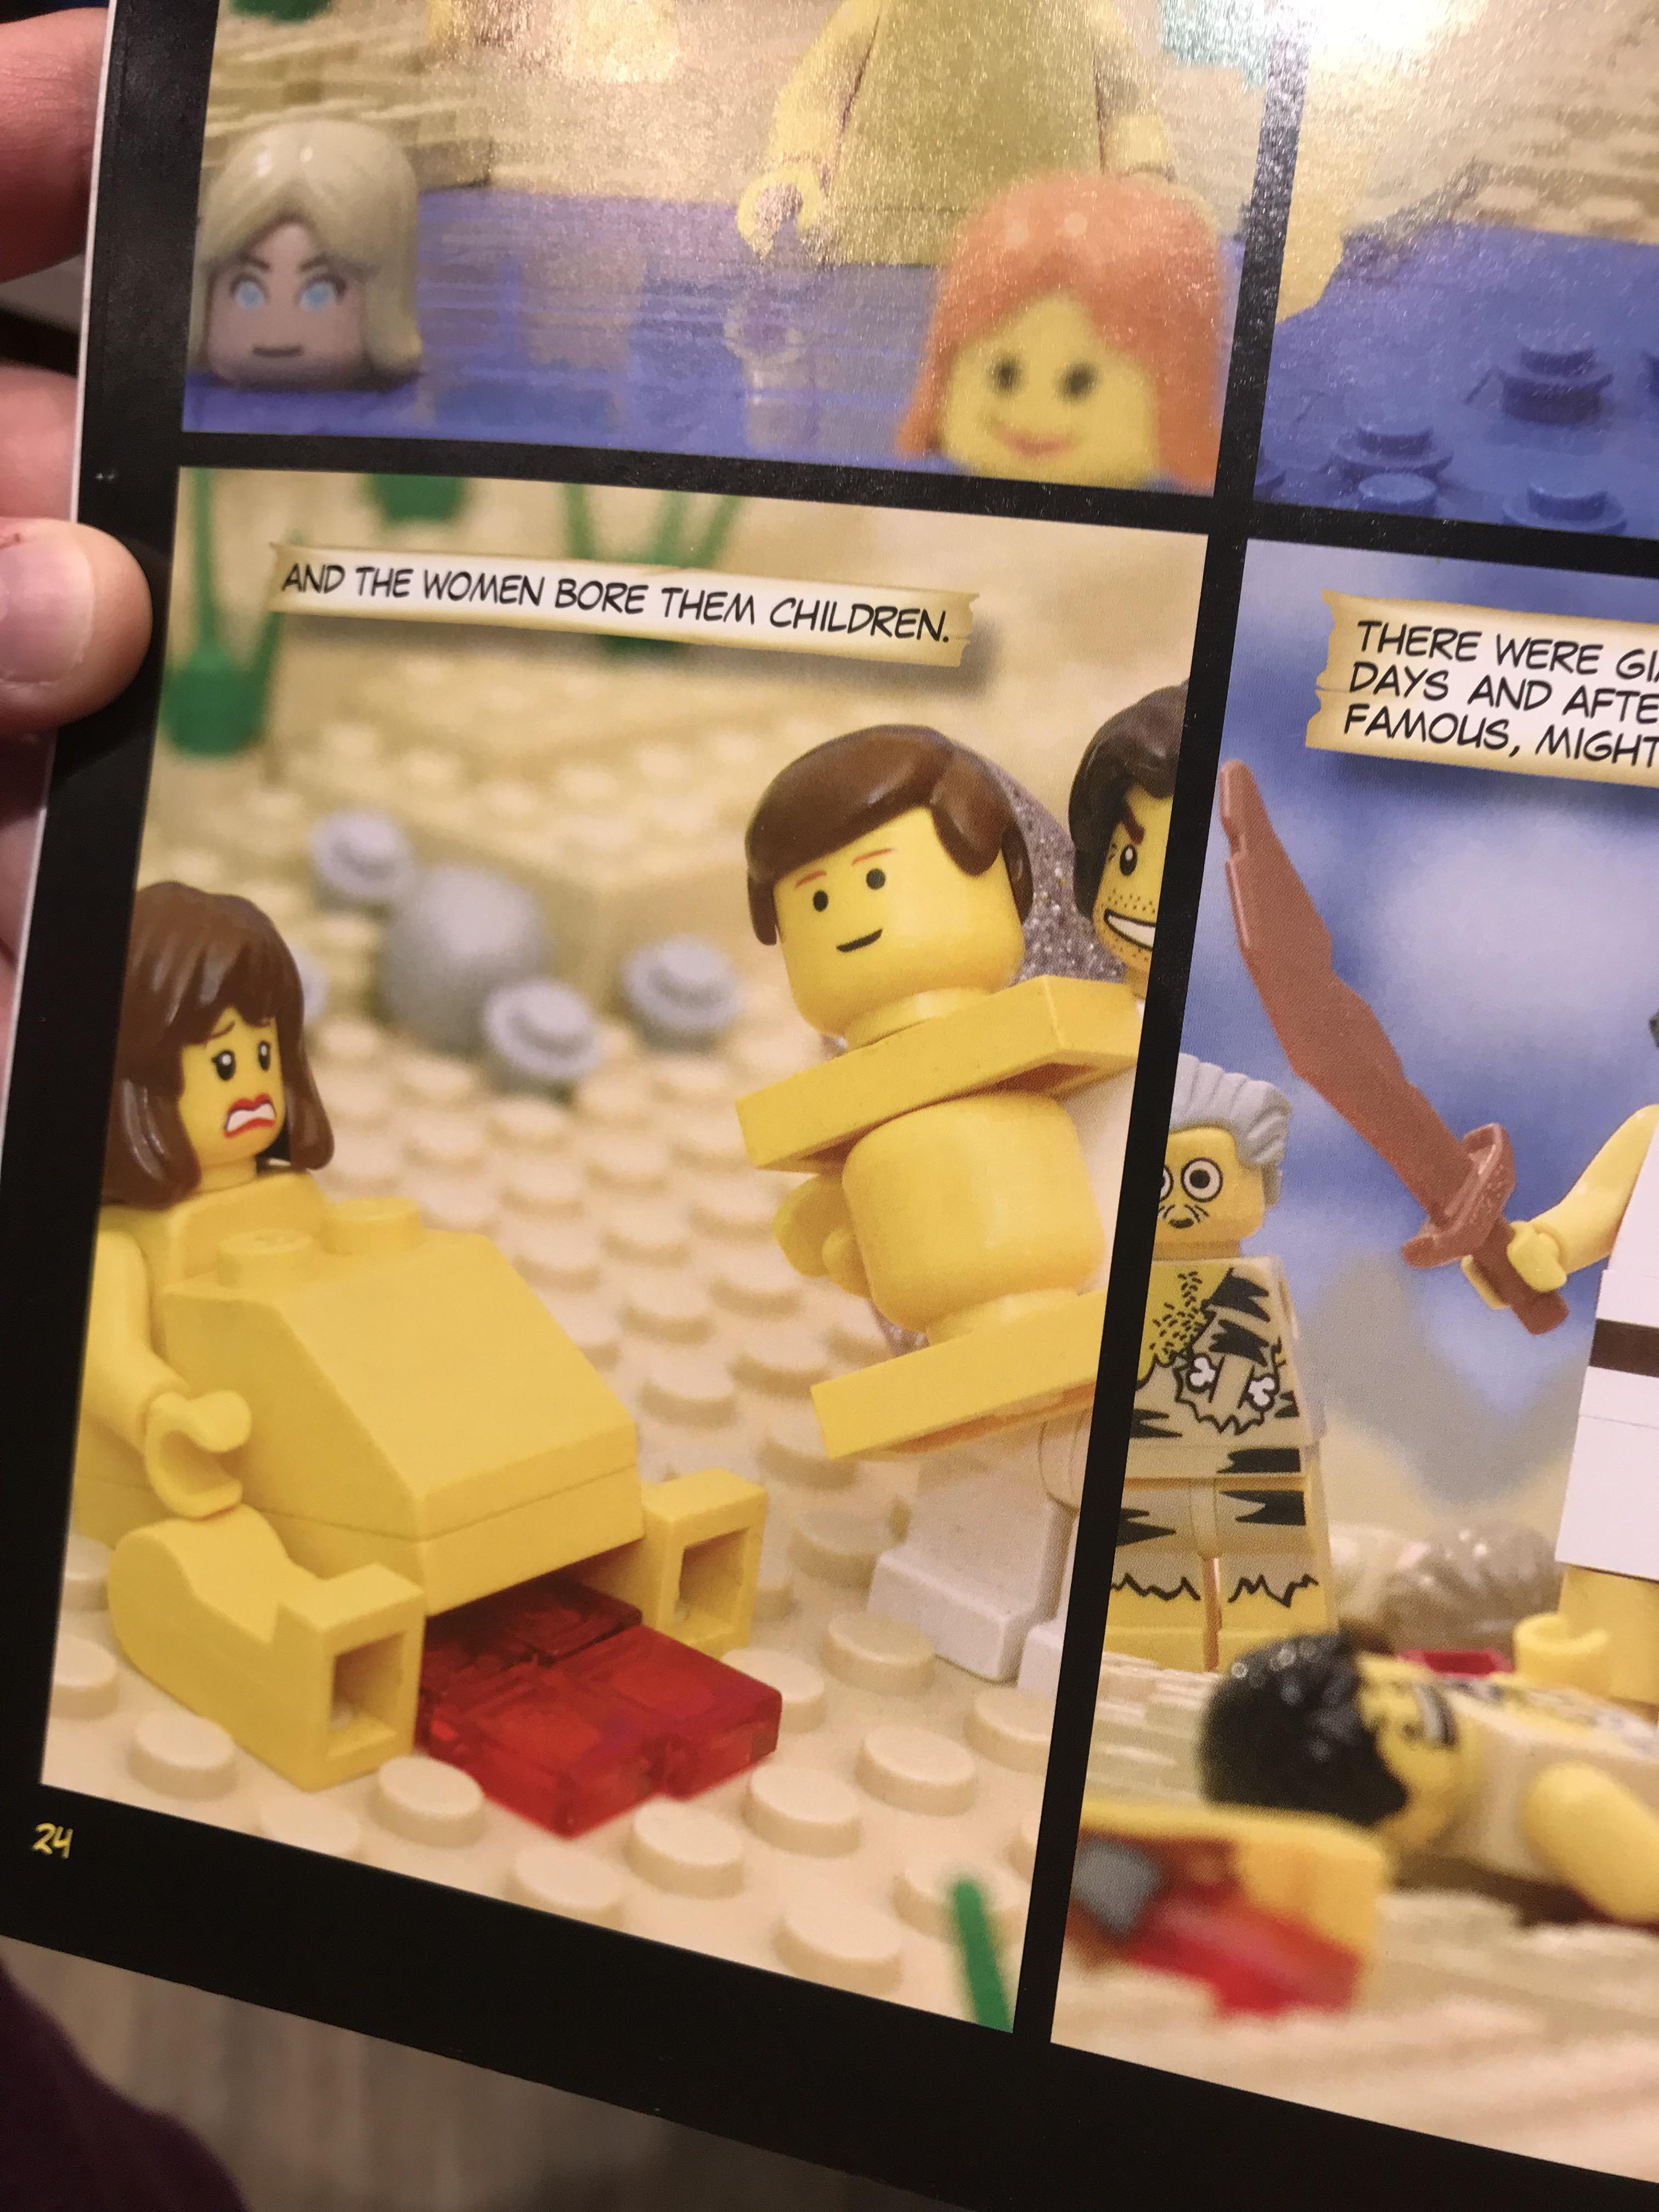 The Children's LEGO Bible is a thing.